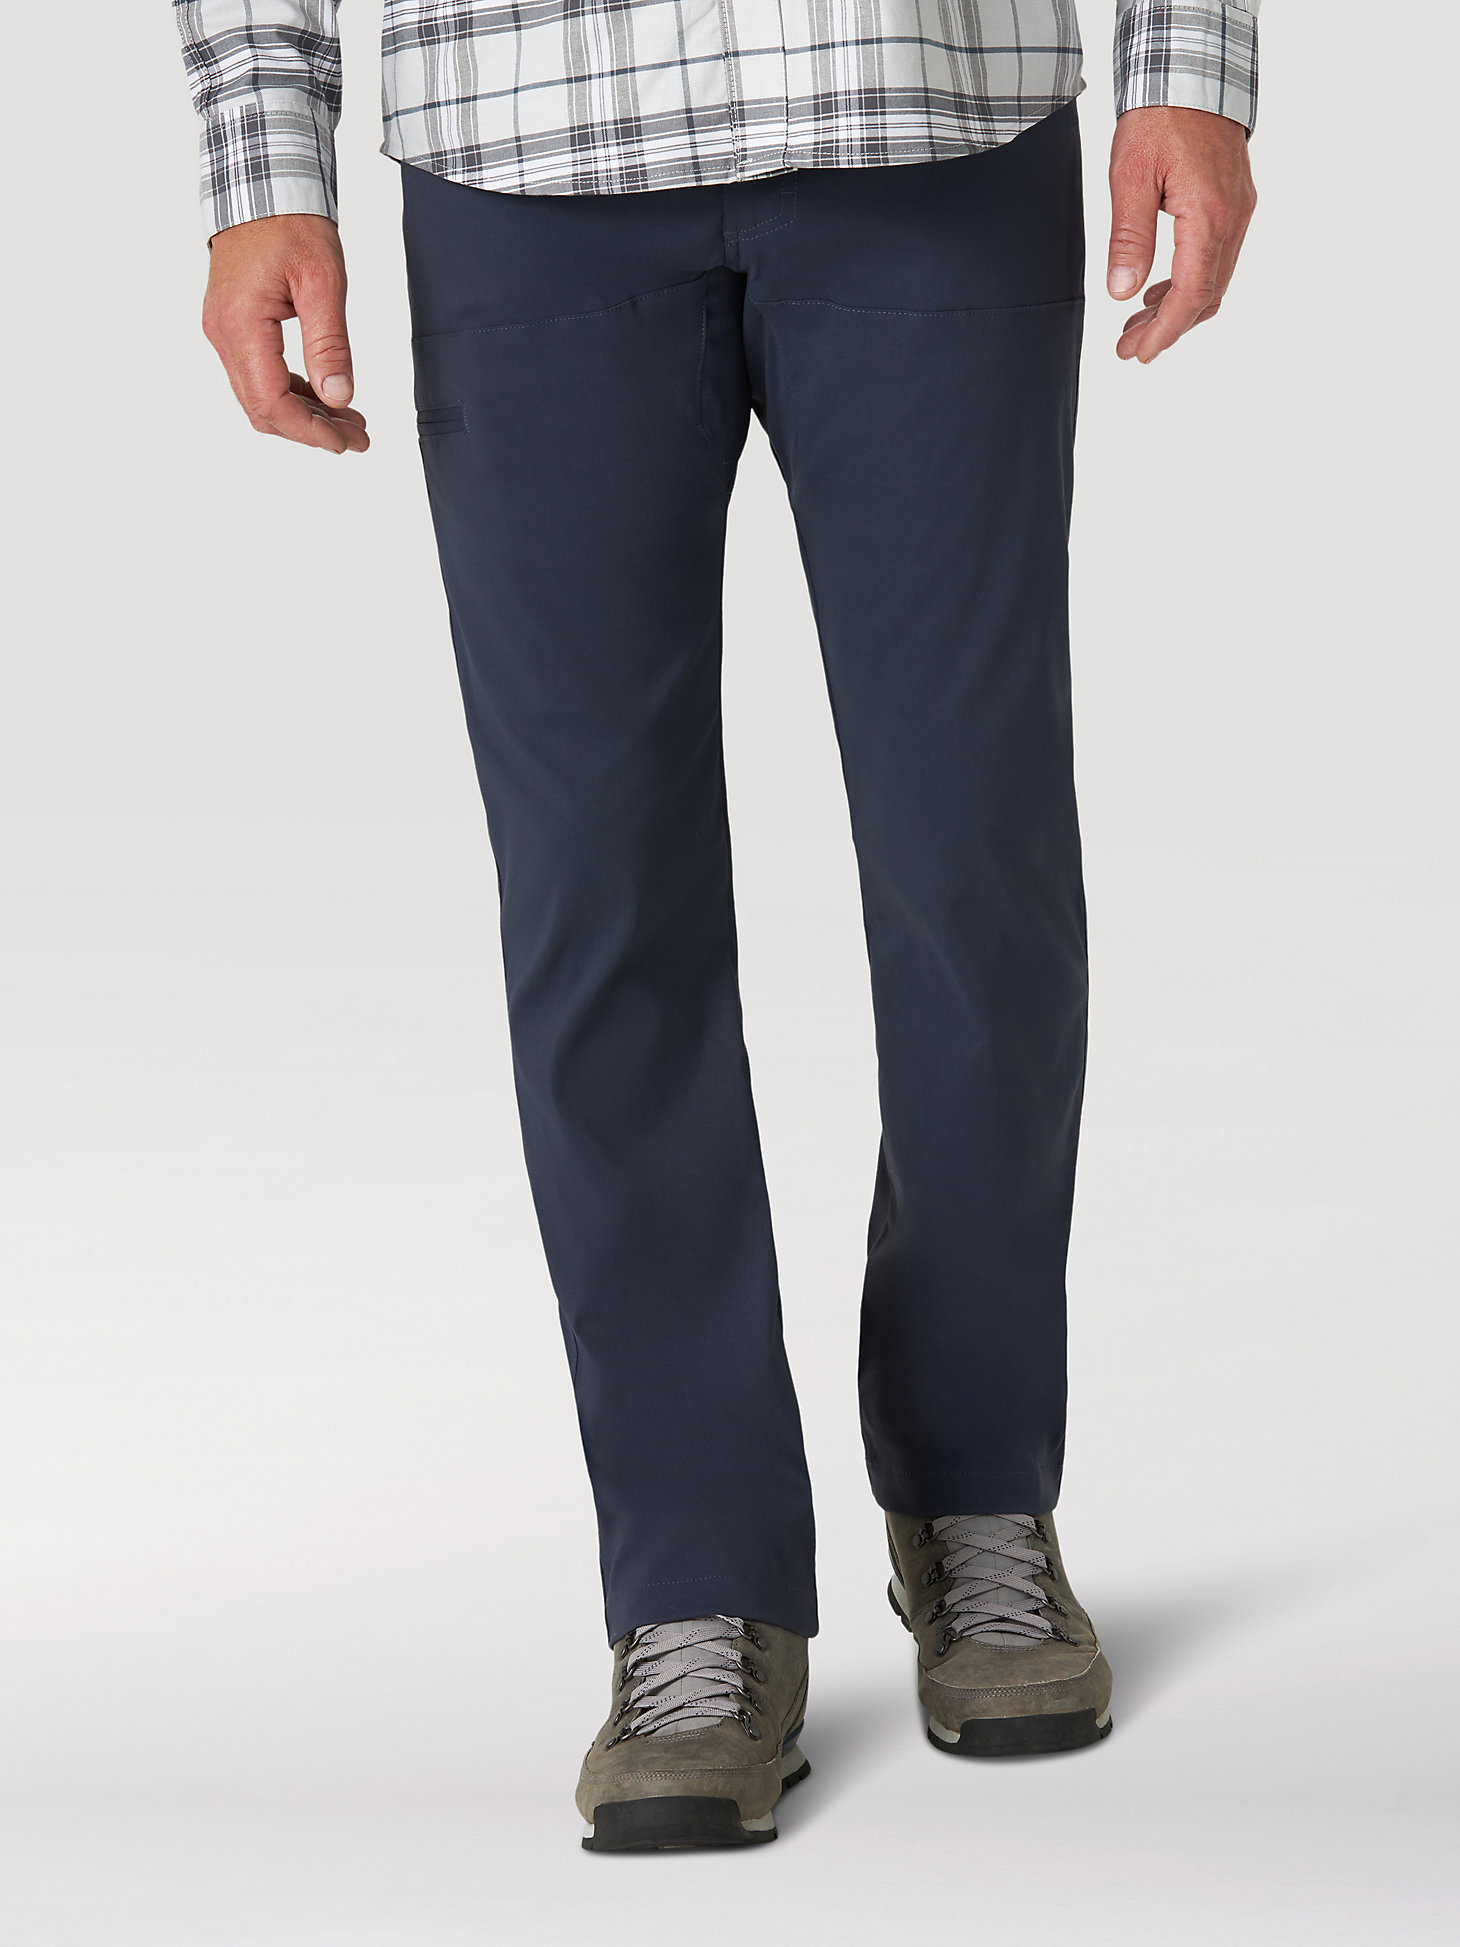 ATG by Wrangler™ Men's Synthetic Utility Pant in Indigo main view